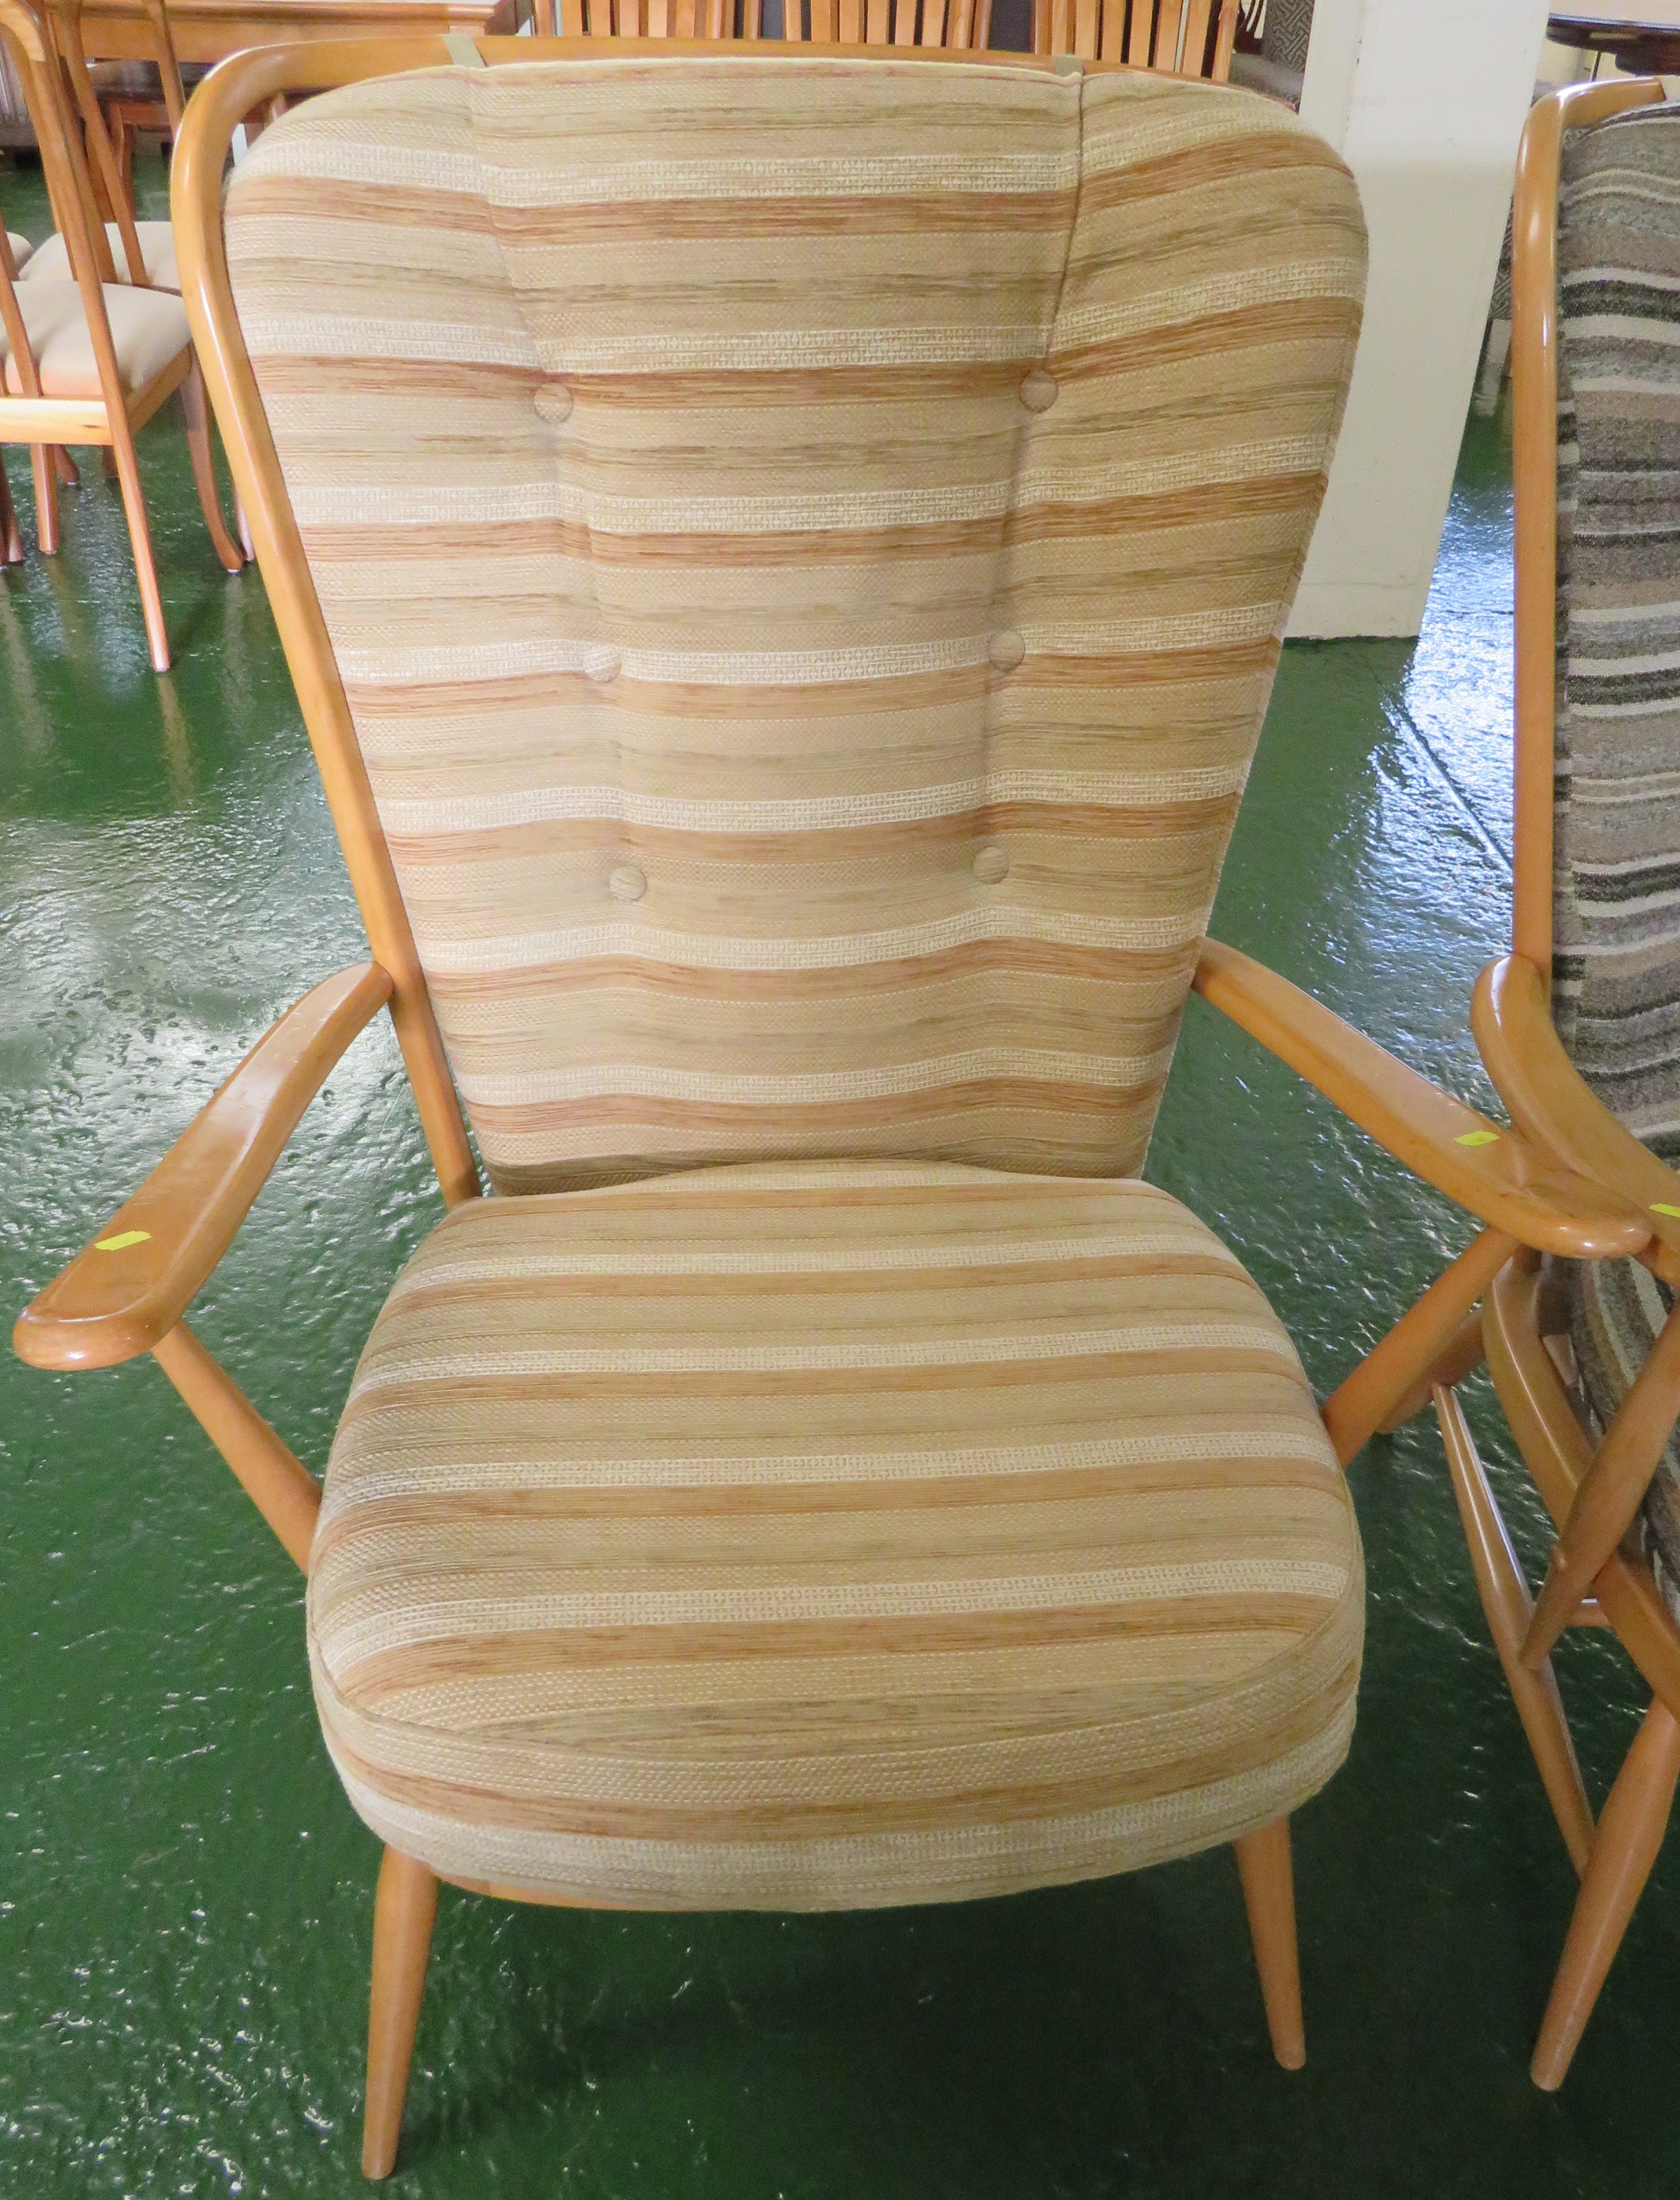 MATCHED PAIR OF ERCOL LIGHT ELM ARMCHAIRS WITH TIE ON STRIPED UPHOLSTERED CUSHIONS - Image 2 of 3